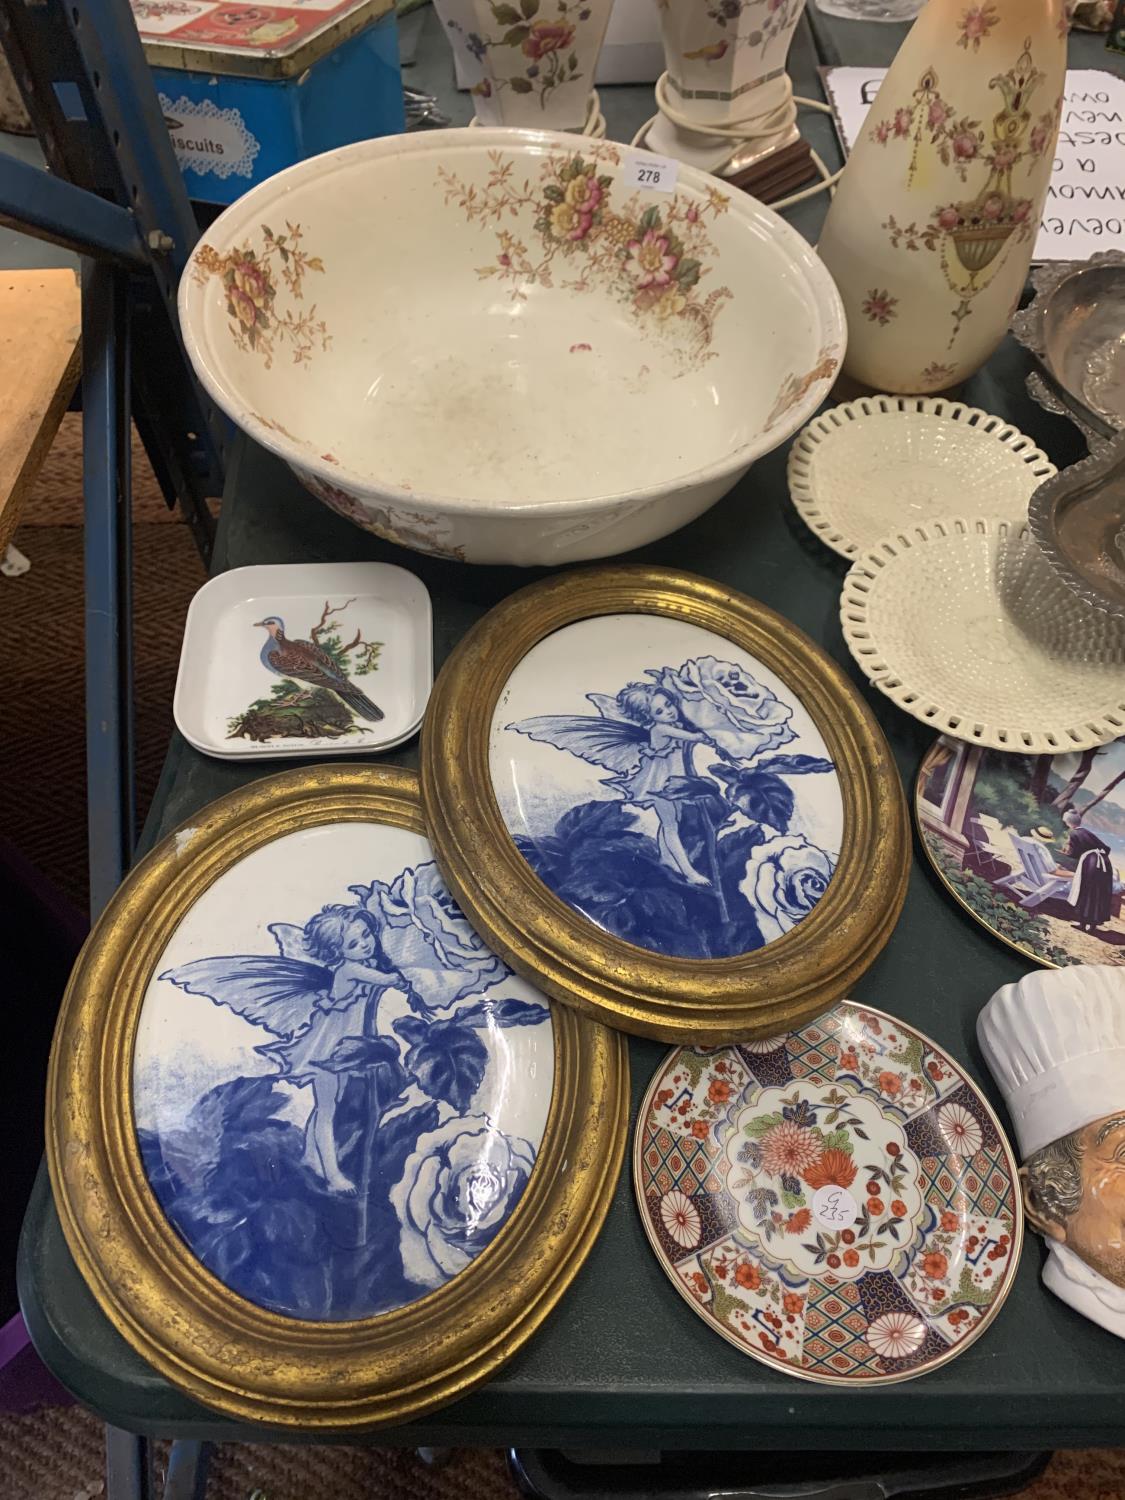 AN ASSORTMENT OF ITEMS TO INCLUDE CERAMICS, SILVER PLATE AND A PAIR OF OVAL GILT FRAMED CERAMIC - Image 3 of 3